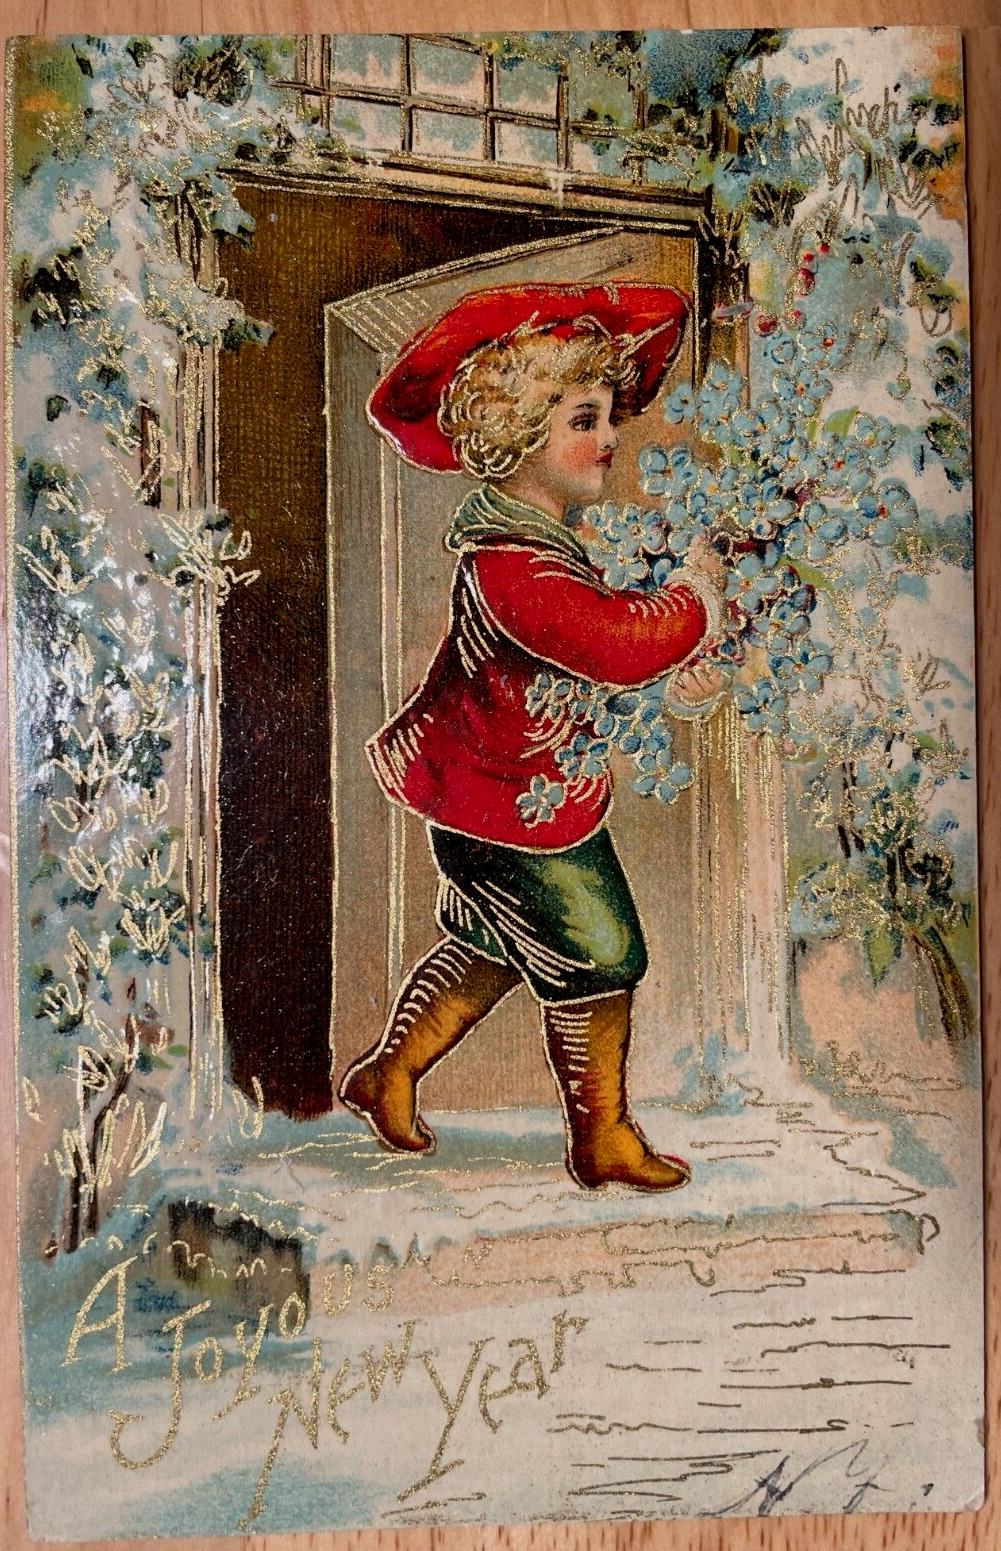 Vintage Victorian Postcard 1901-1910 A Joyous New Year - Dashing Boy in Red